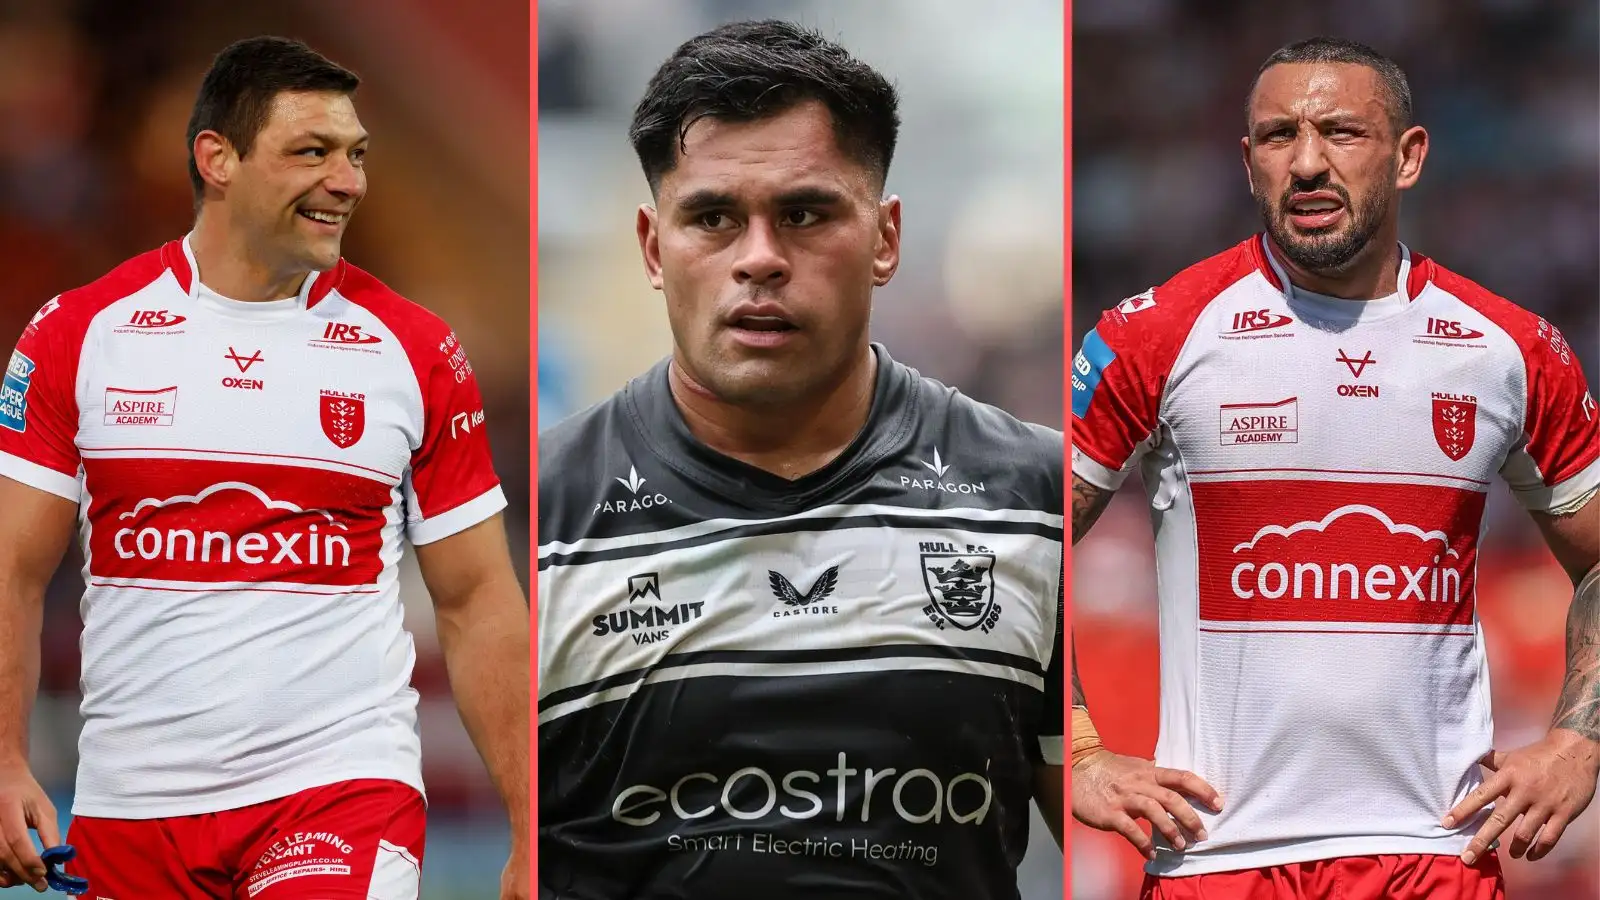 An incredibly impressive combined 13 of Hull FC & Hull KR stars ahead of Saturday’s derby